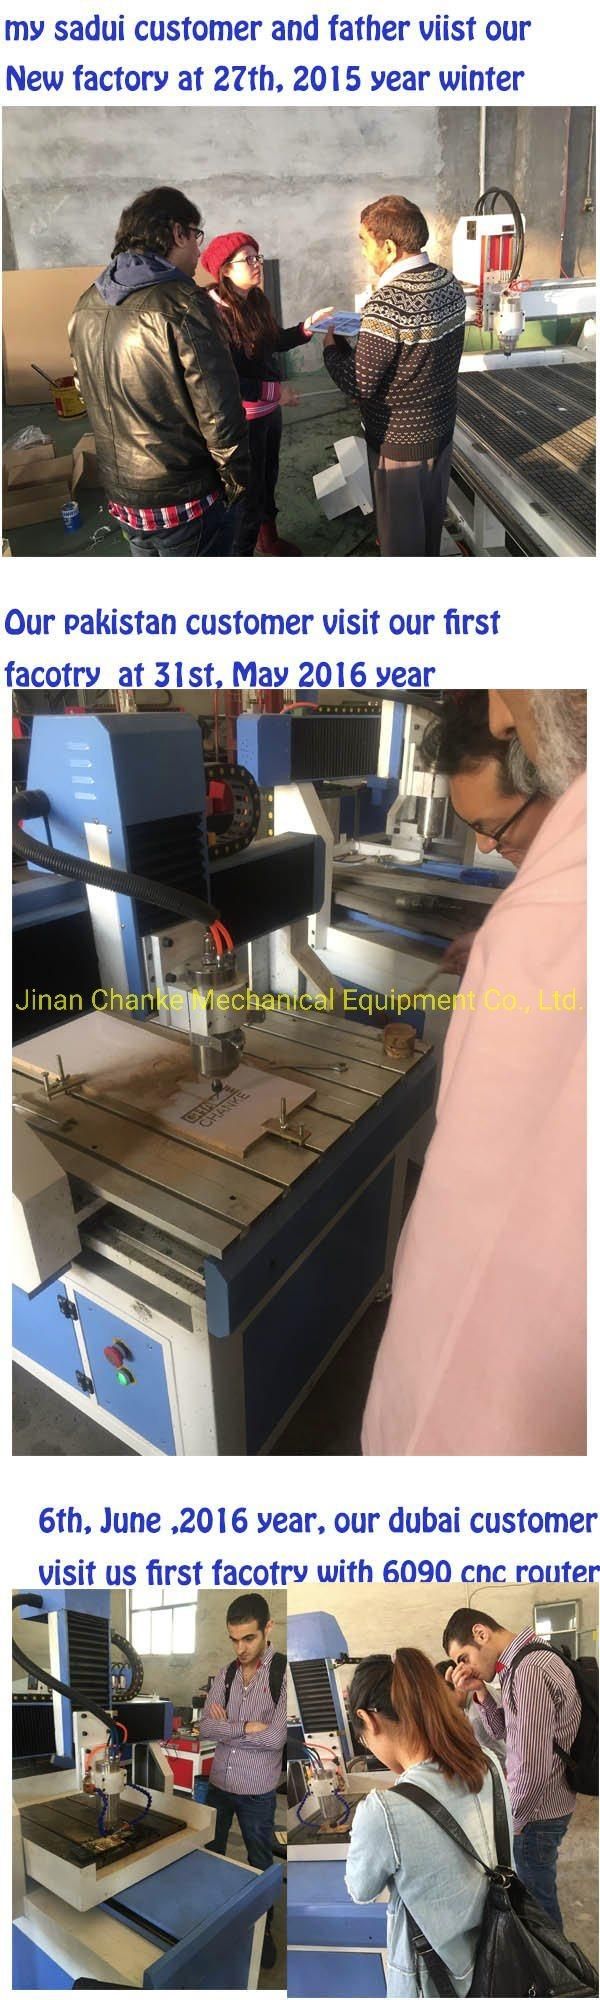 Low Price Distributor Wanted Wood CNC Router Machine with Europe Quality